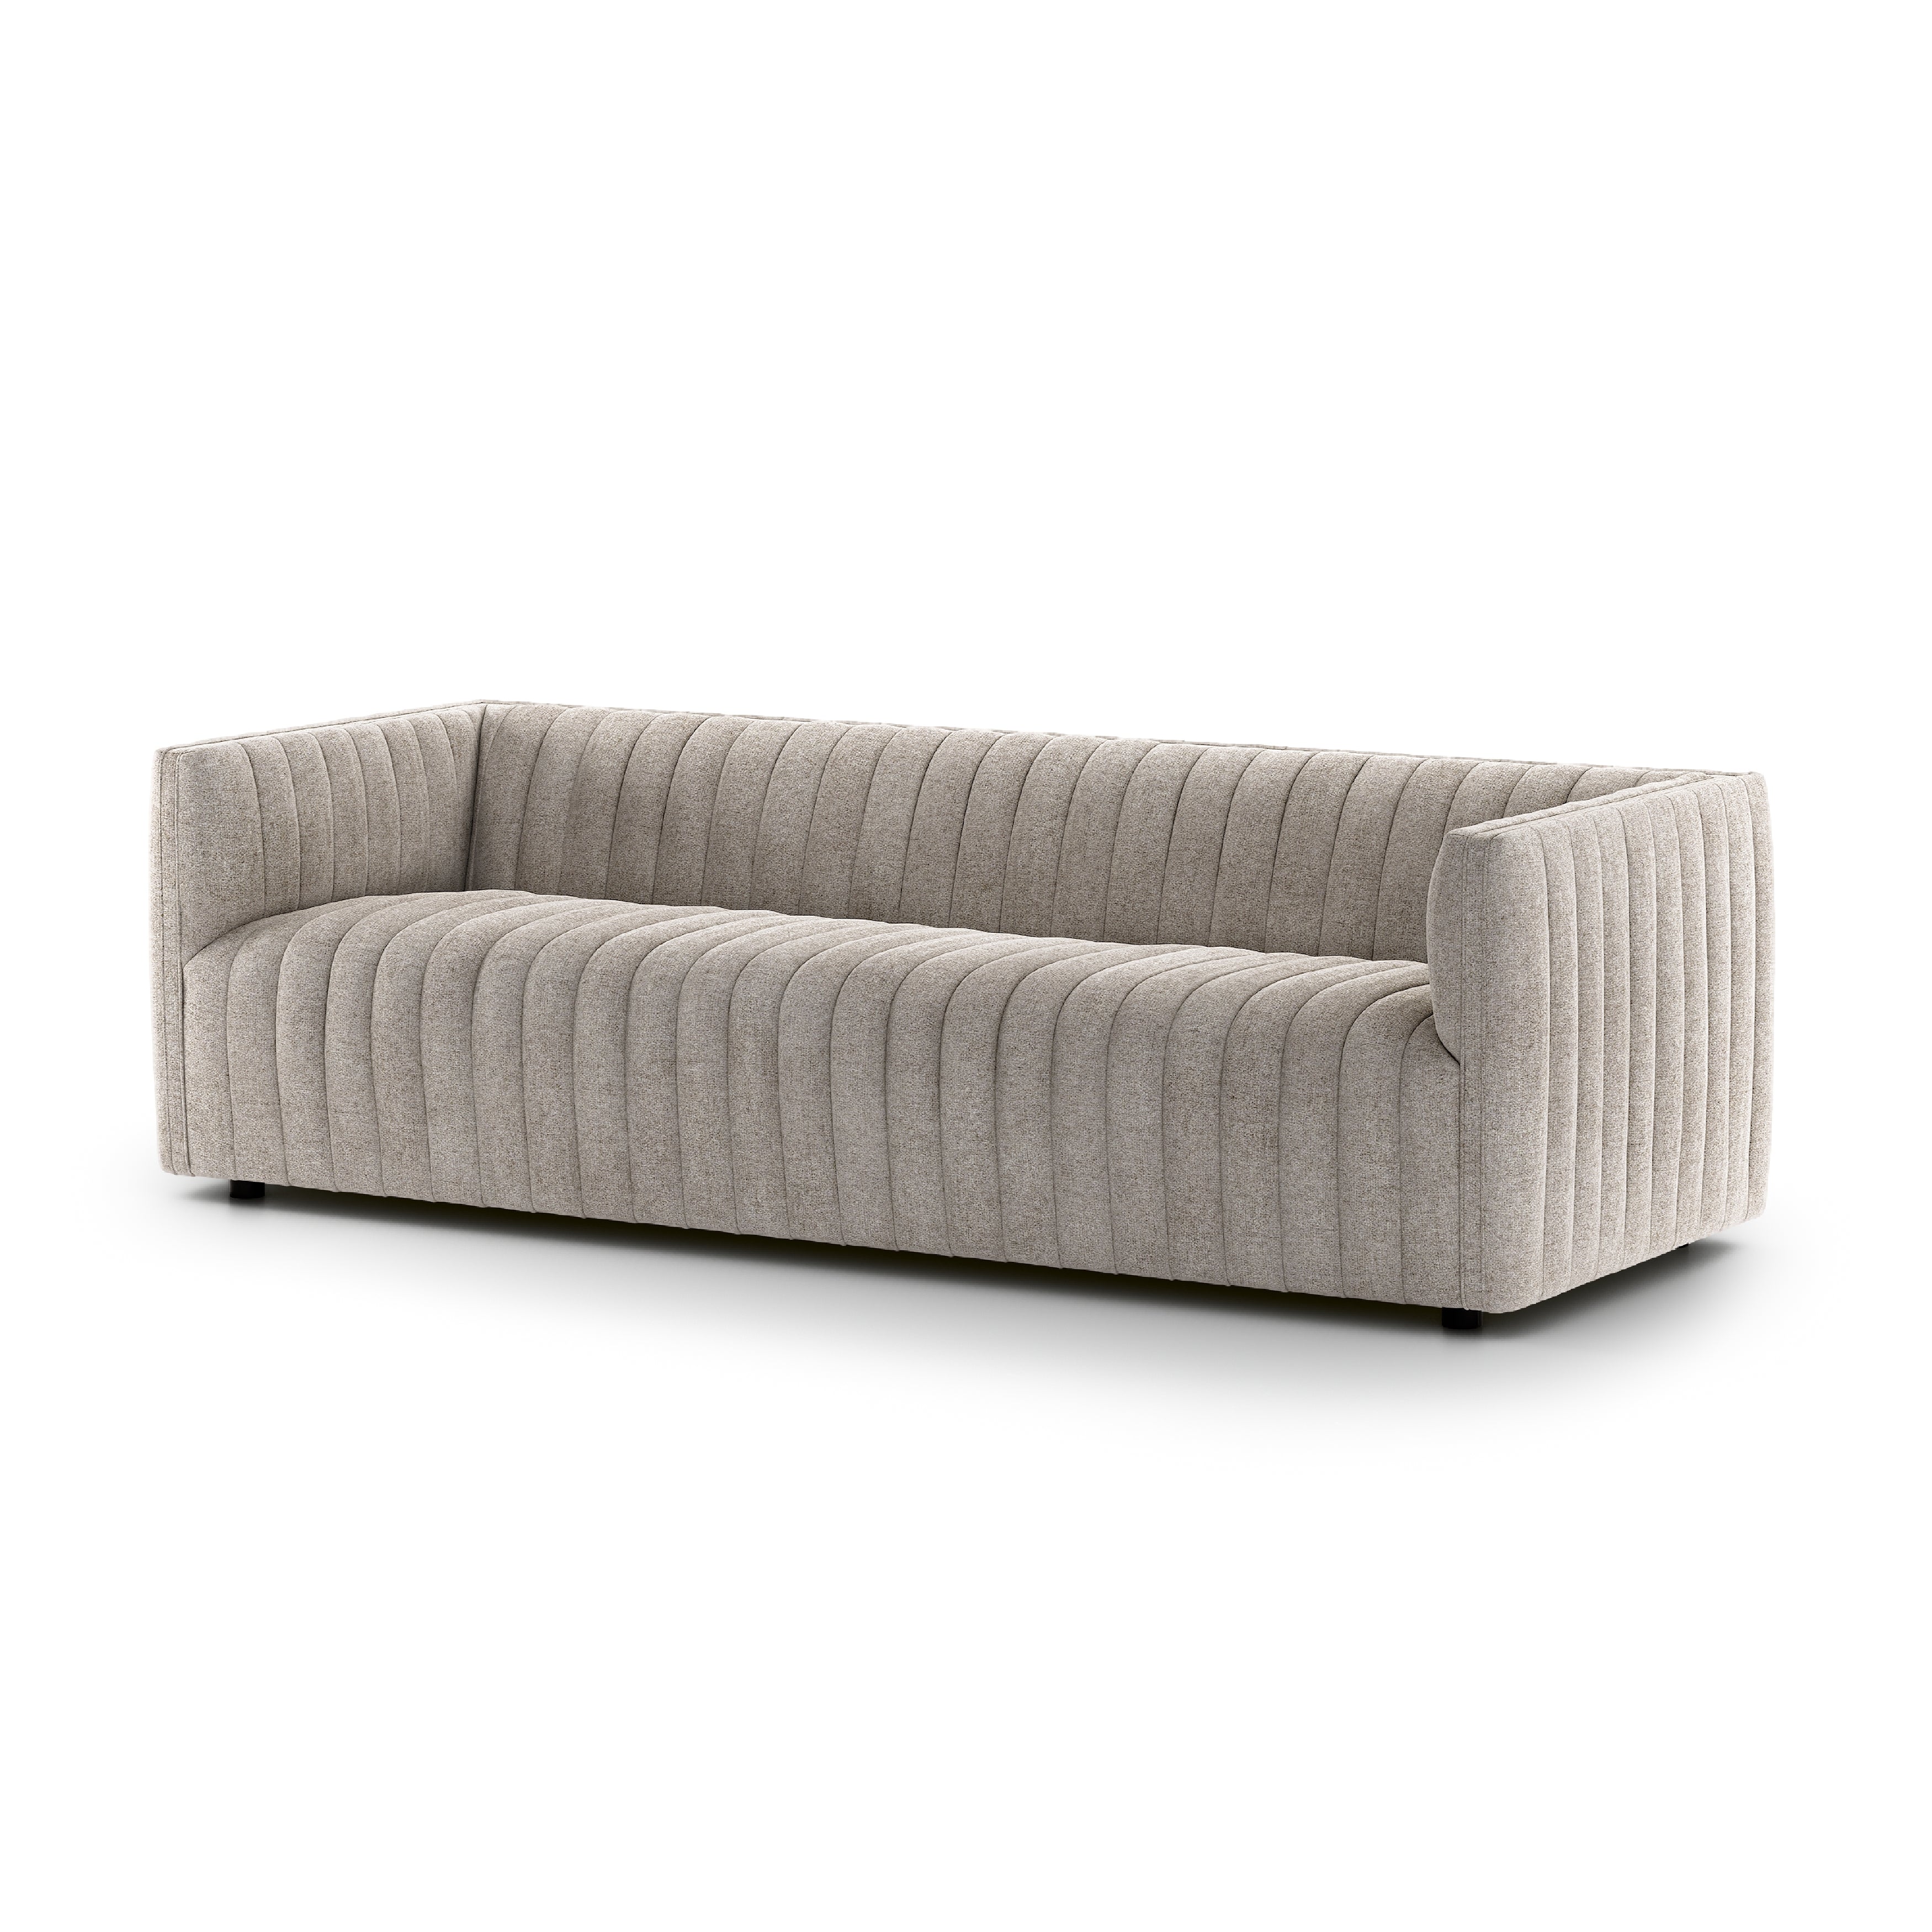 A dramatically channeled sofa with textural grey upholstery offers a clean look inspired by modern menswear. Amethyst Home provides interior design, new construction, custom furniture, and area rugs in the Alpharetta metro area.